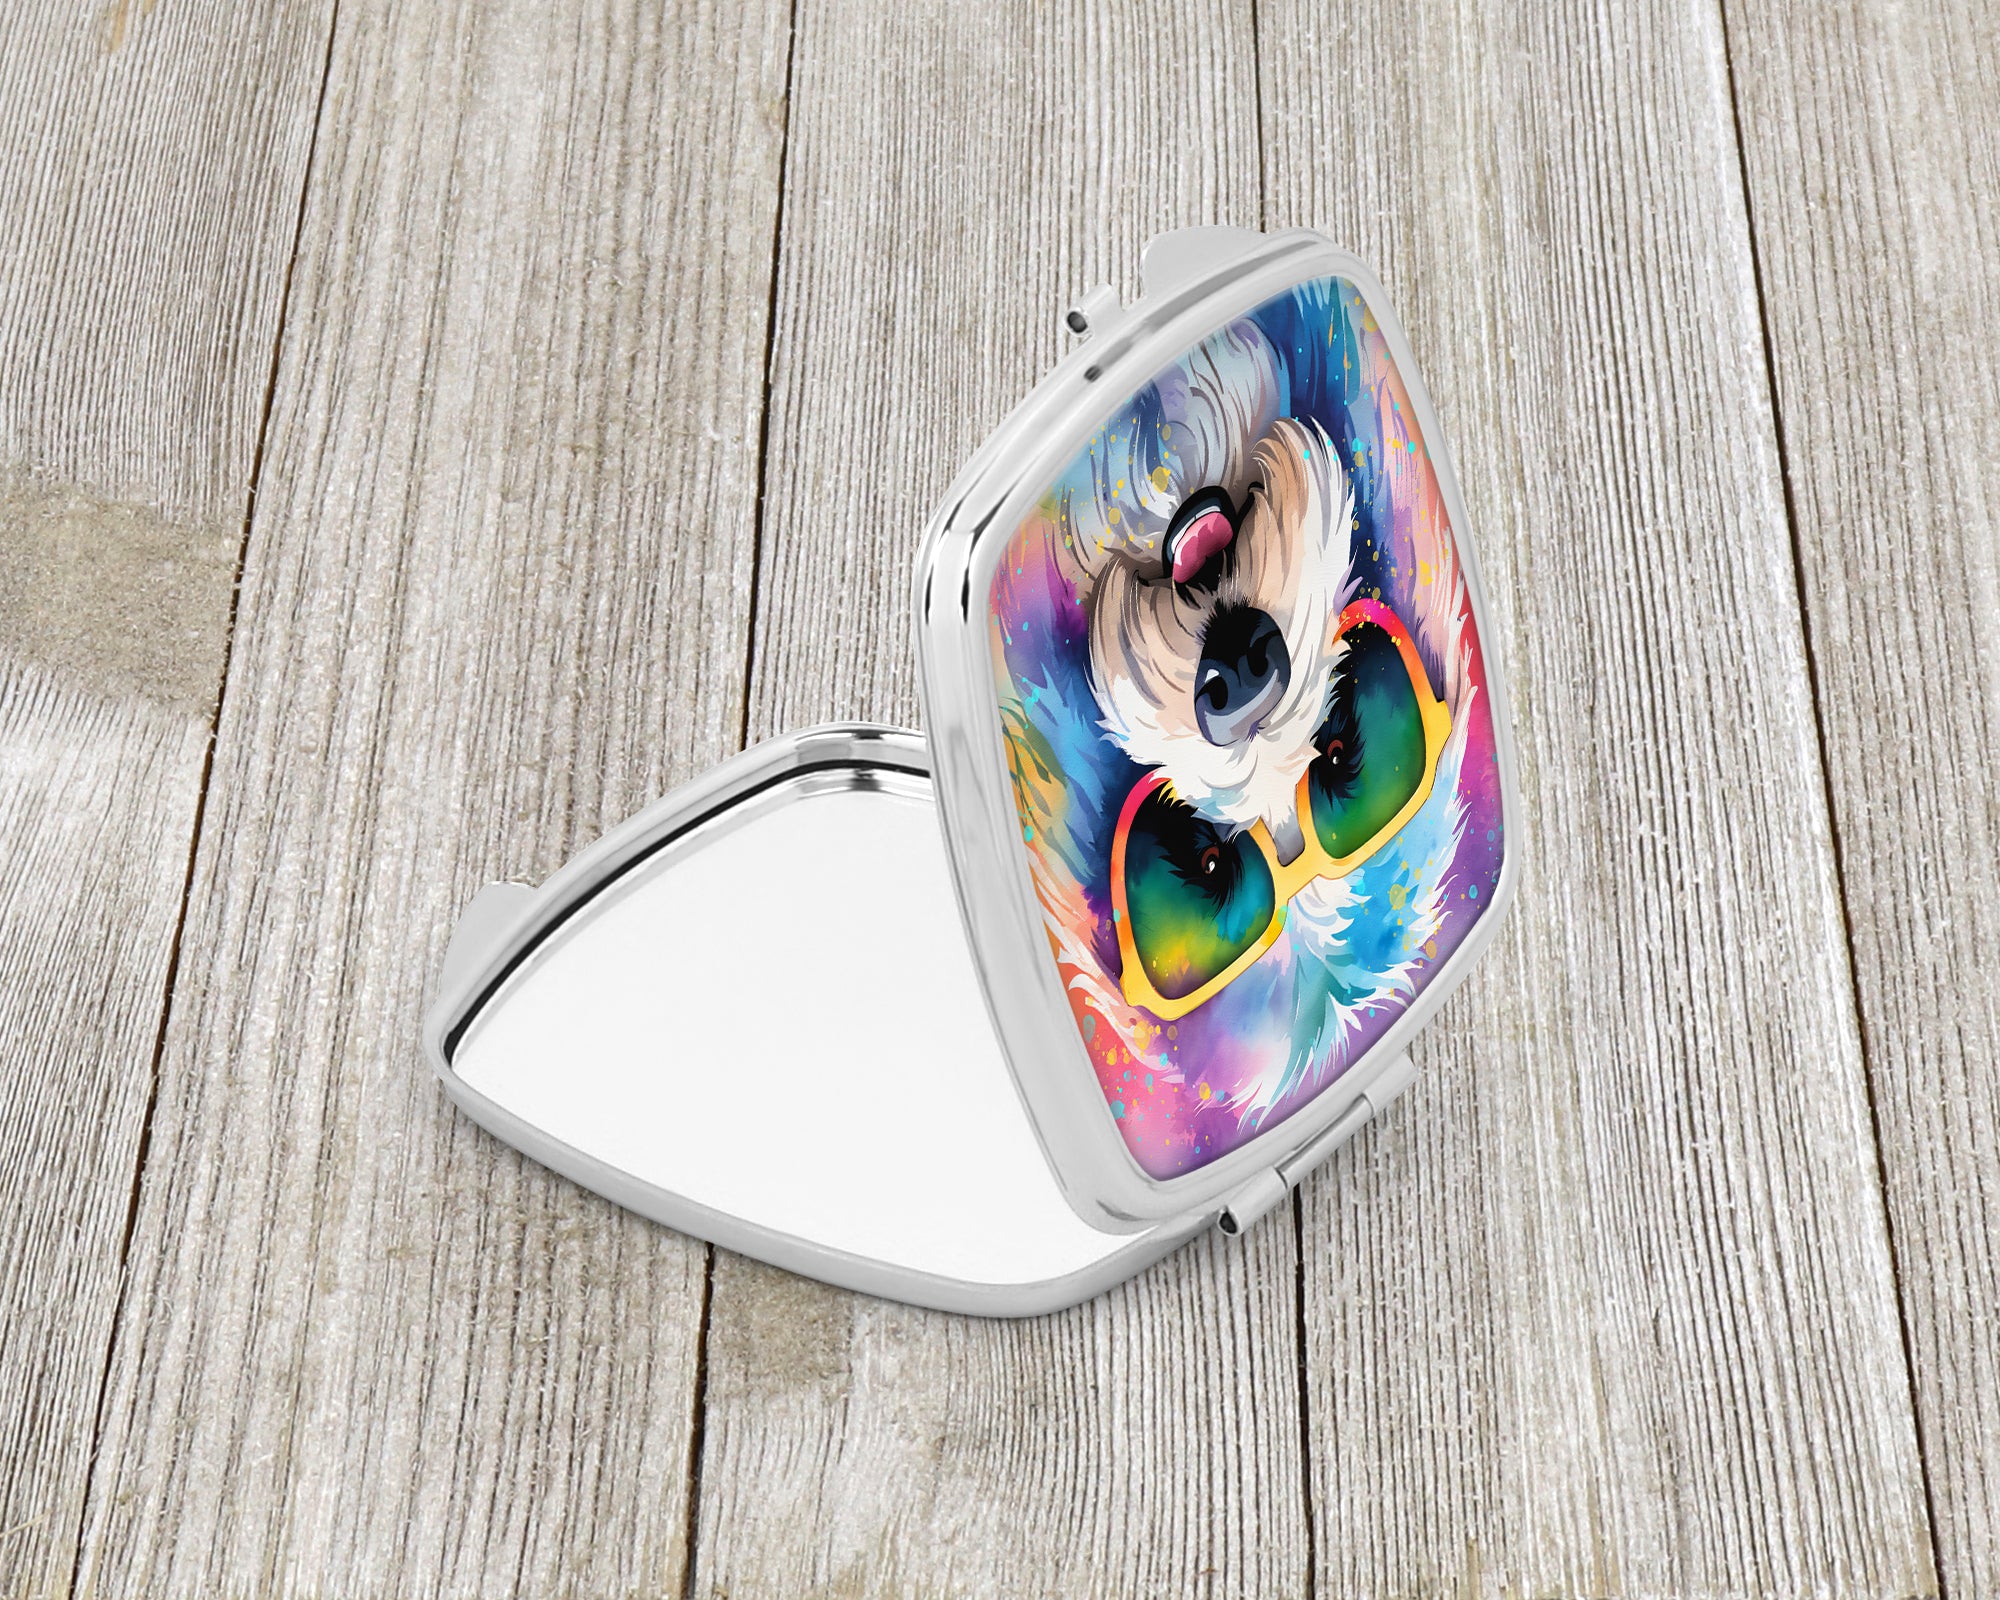 Buy this Old English Sheepdog Hippie Dawg Compact Mirror